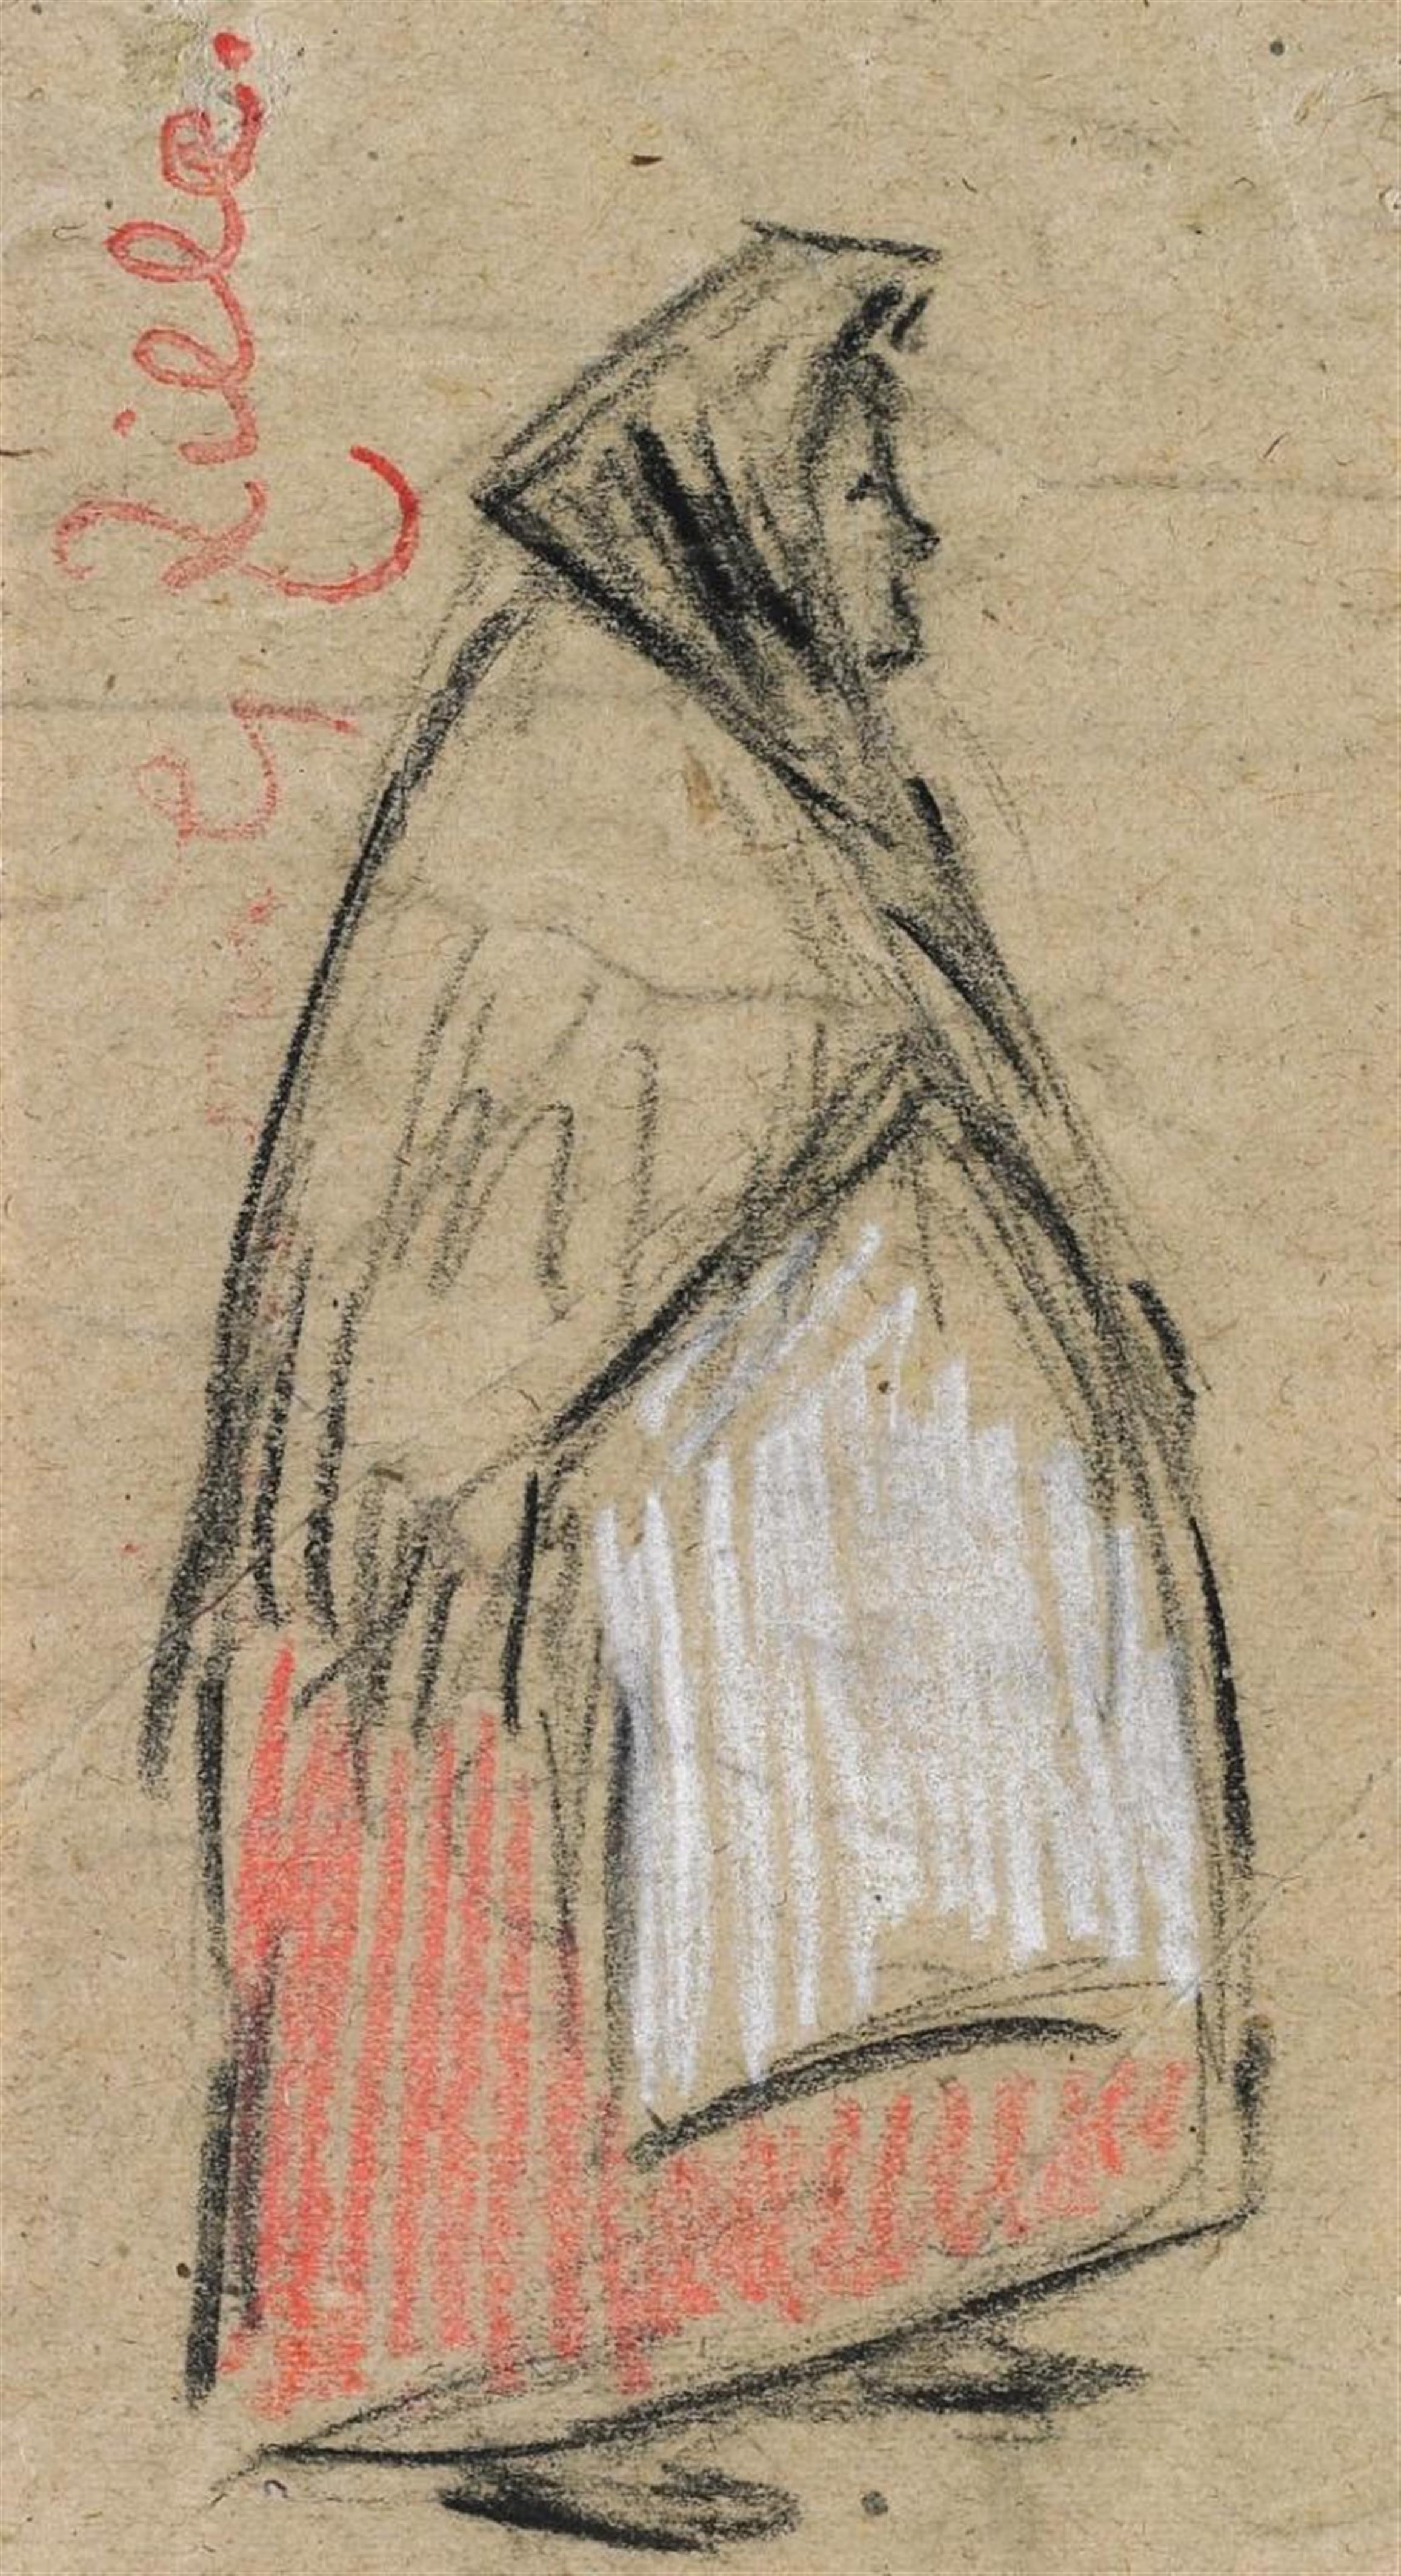 Heinrich Zille - Two drawings: Frau im Fransentuch mit weisser Schürze. Dame mit Hut und Stola - Rückenfigur (Woman with shawl and white apron. Lady with hat and stole - back figure) - image-1